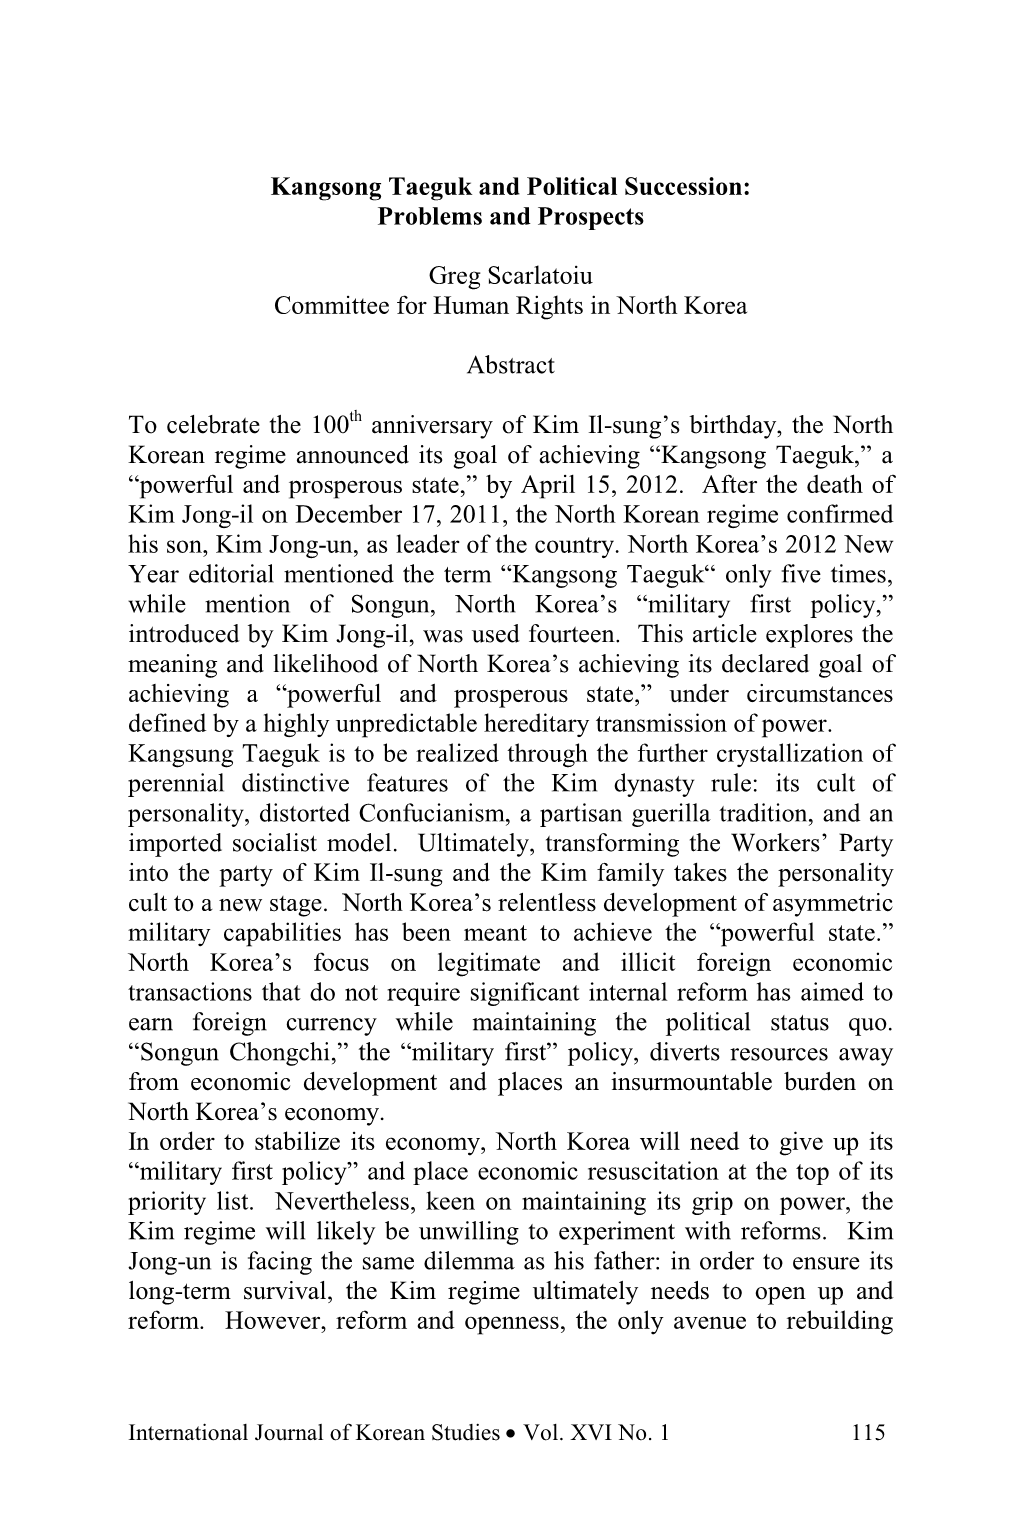 Kangsong Taeguk and Political Succession: Problems and Prospects Greg Scarlatoiu Committee for Human Rights in North Korea Abstr